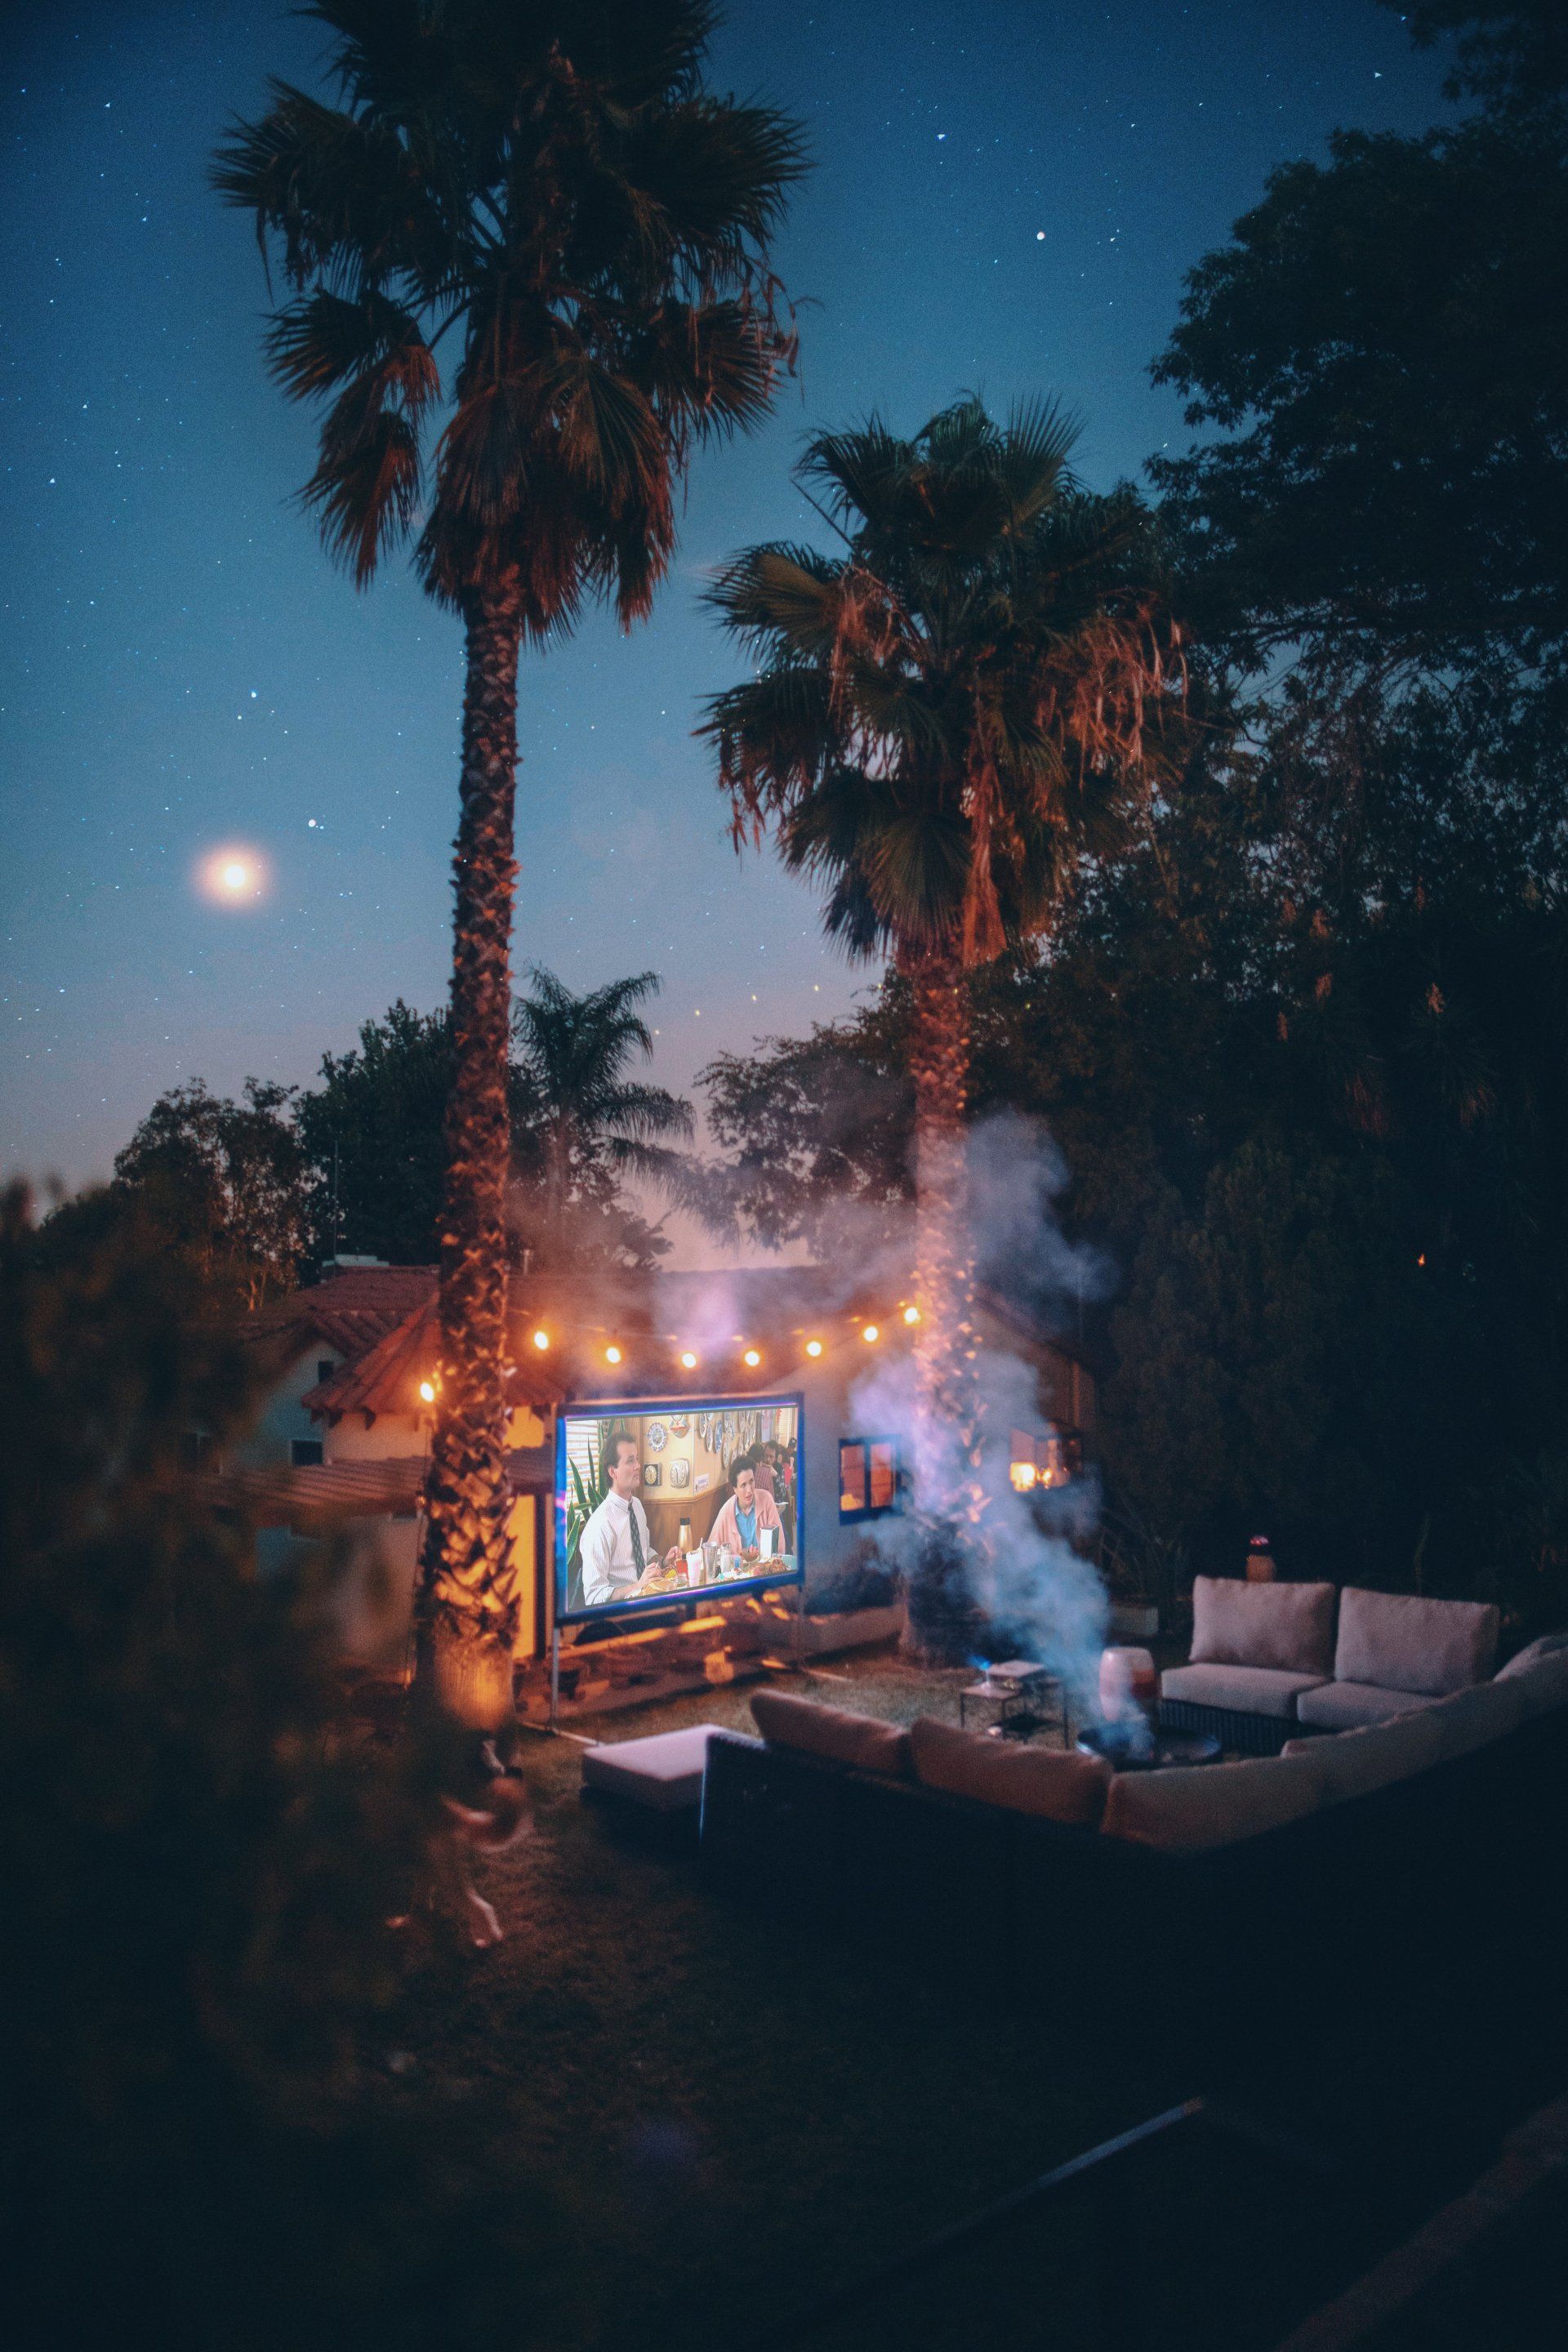 two palm trees and outdoor movie set up